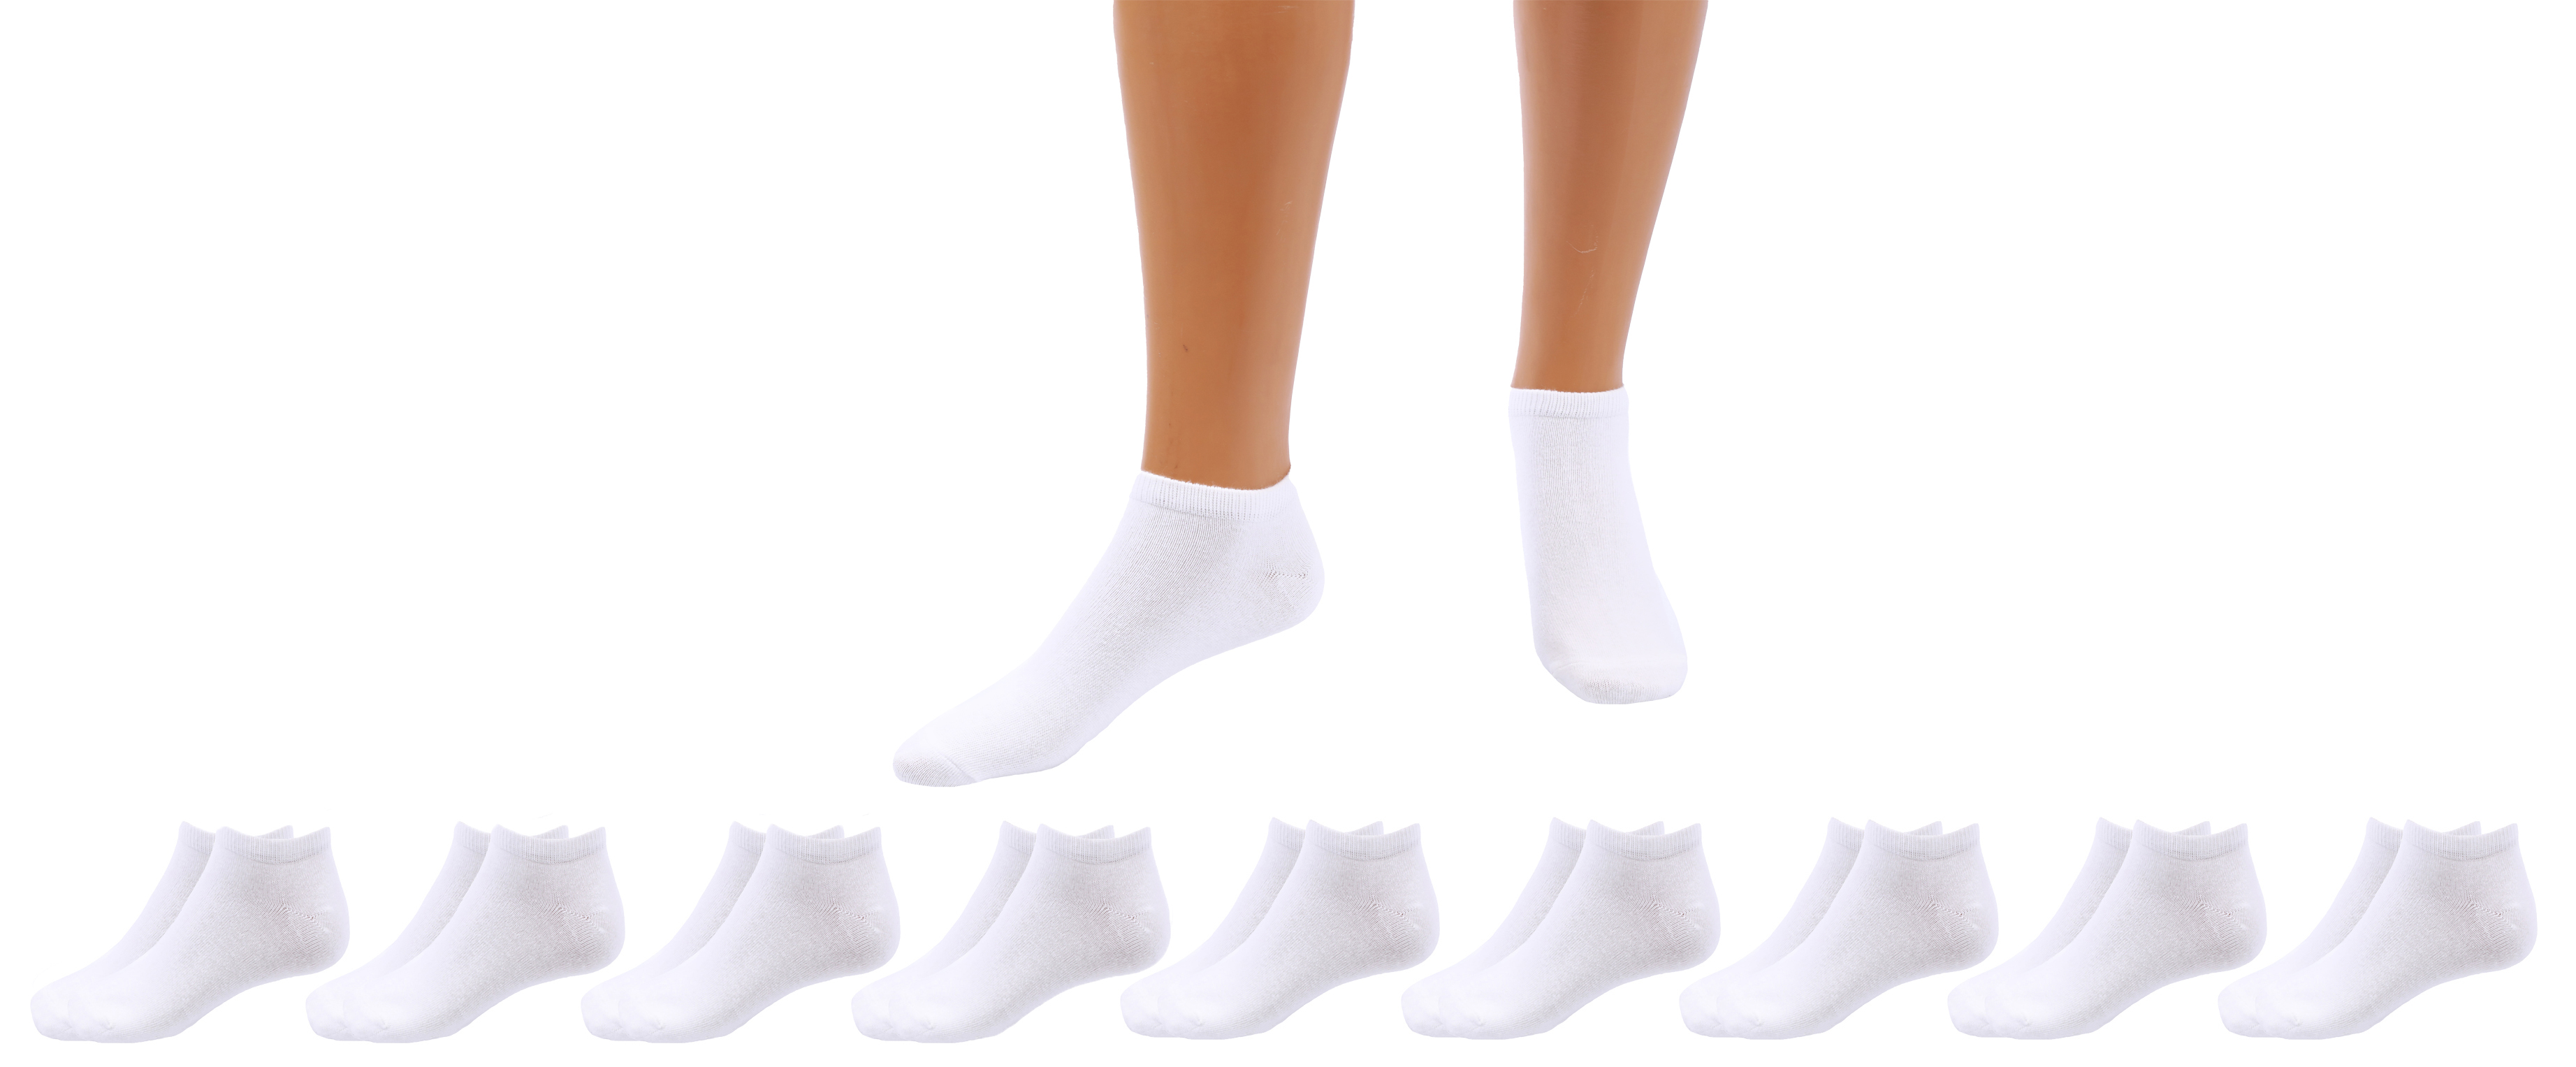 The High-Sock and Sneaker Trend Is About to Take 2020 by Storm, So Bye  Slippy Little Ankle Socks | Long socks outfit, Ankle socks outfit, Sock  outfits